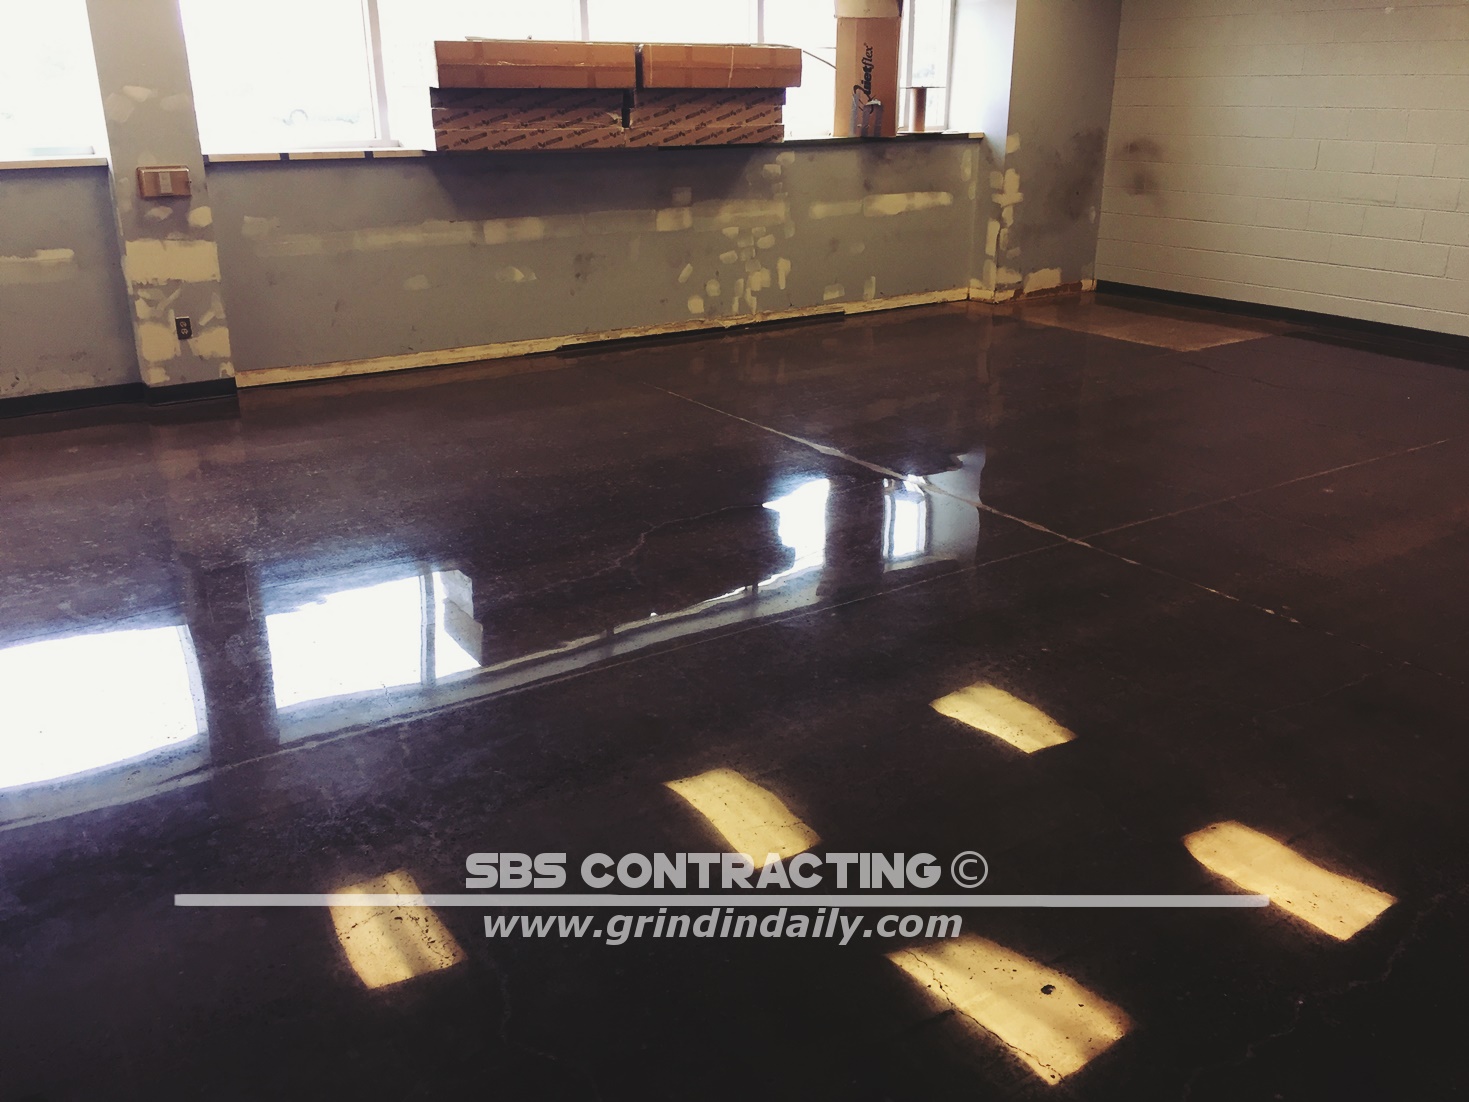 SBS-Contracting-Concrete-Polish-Project-08-01